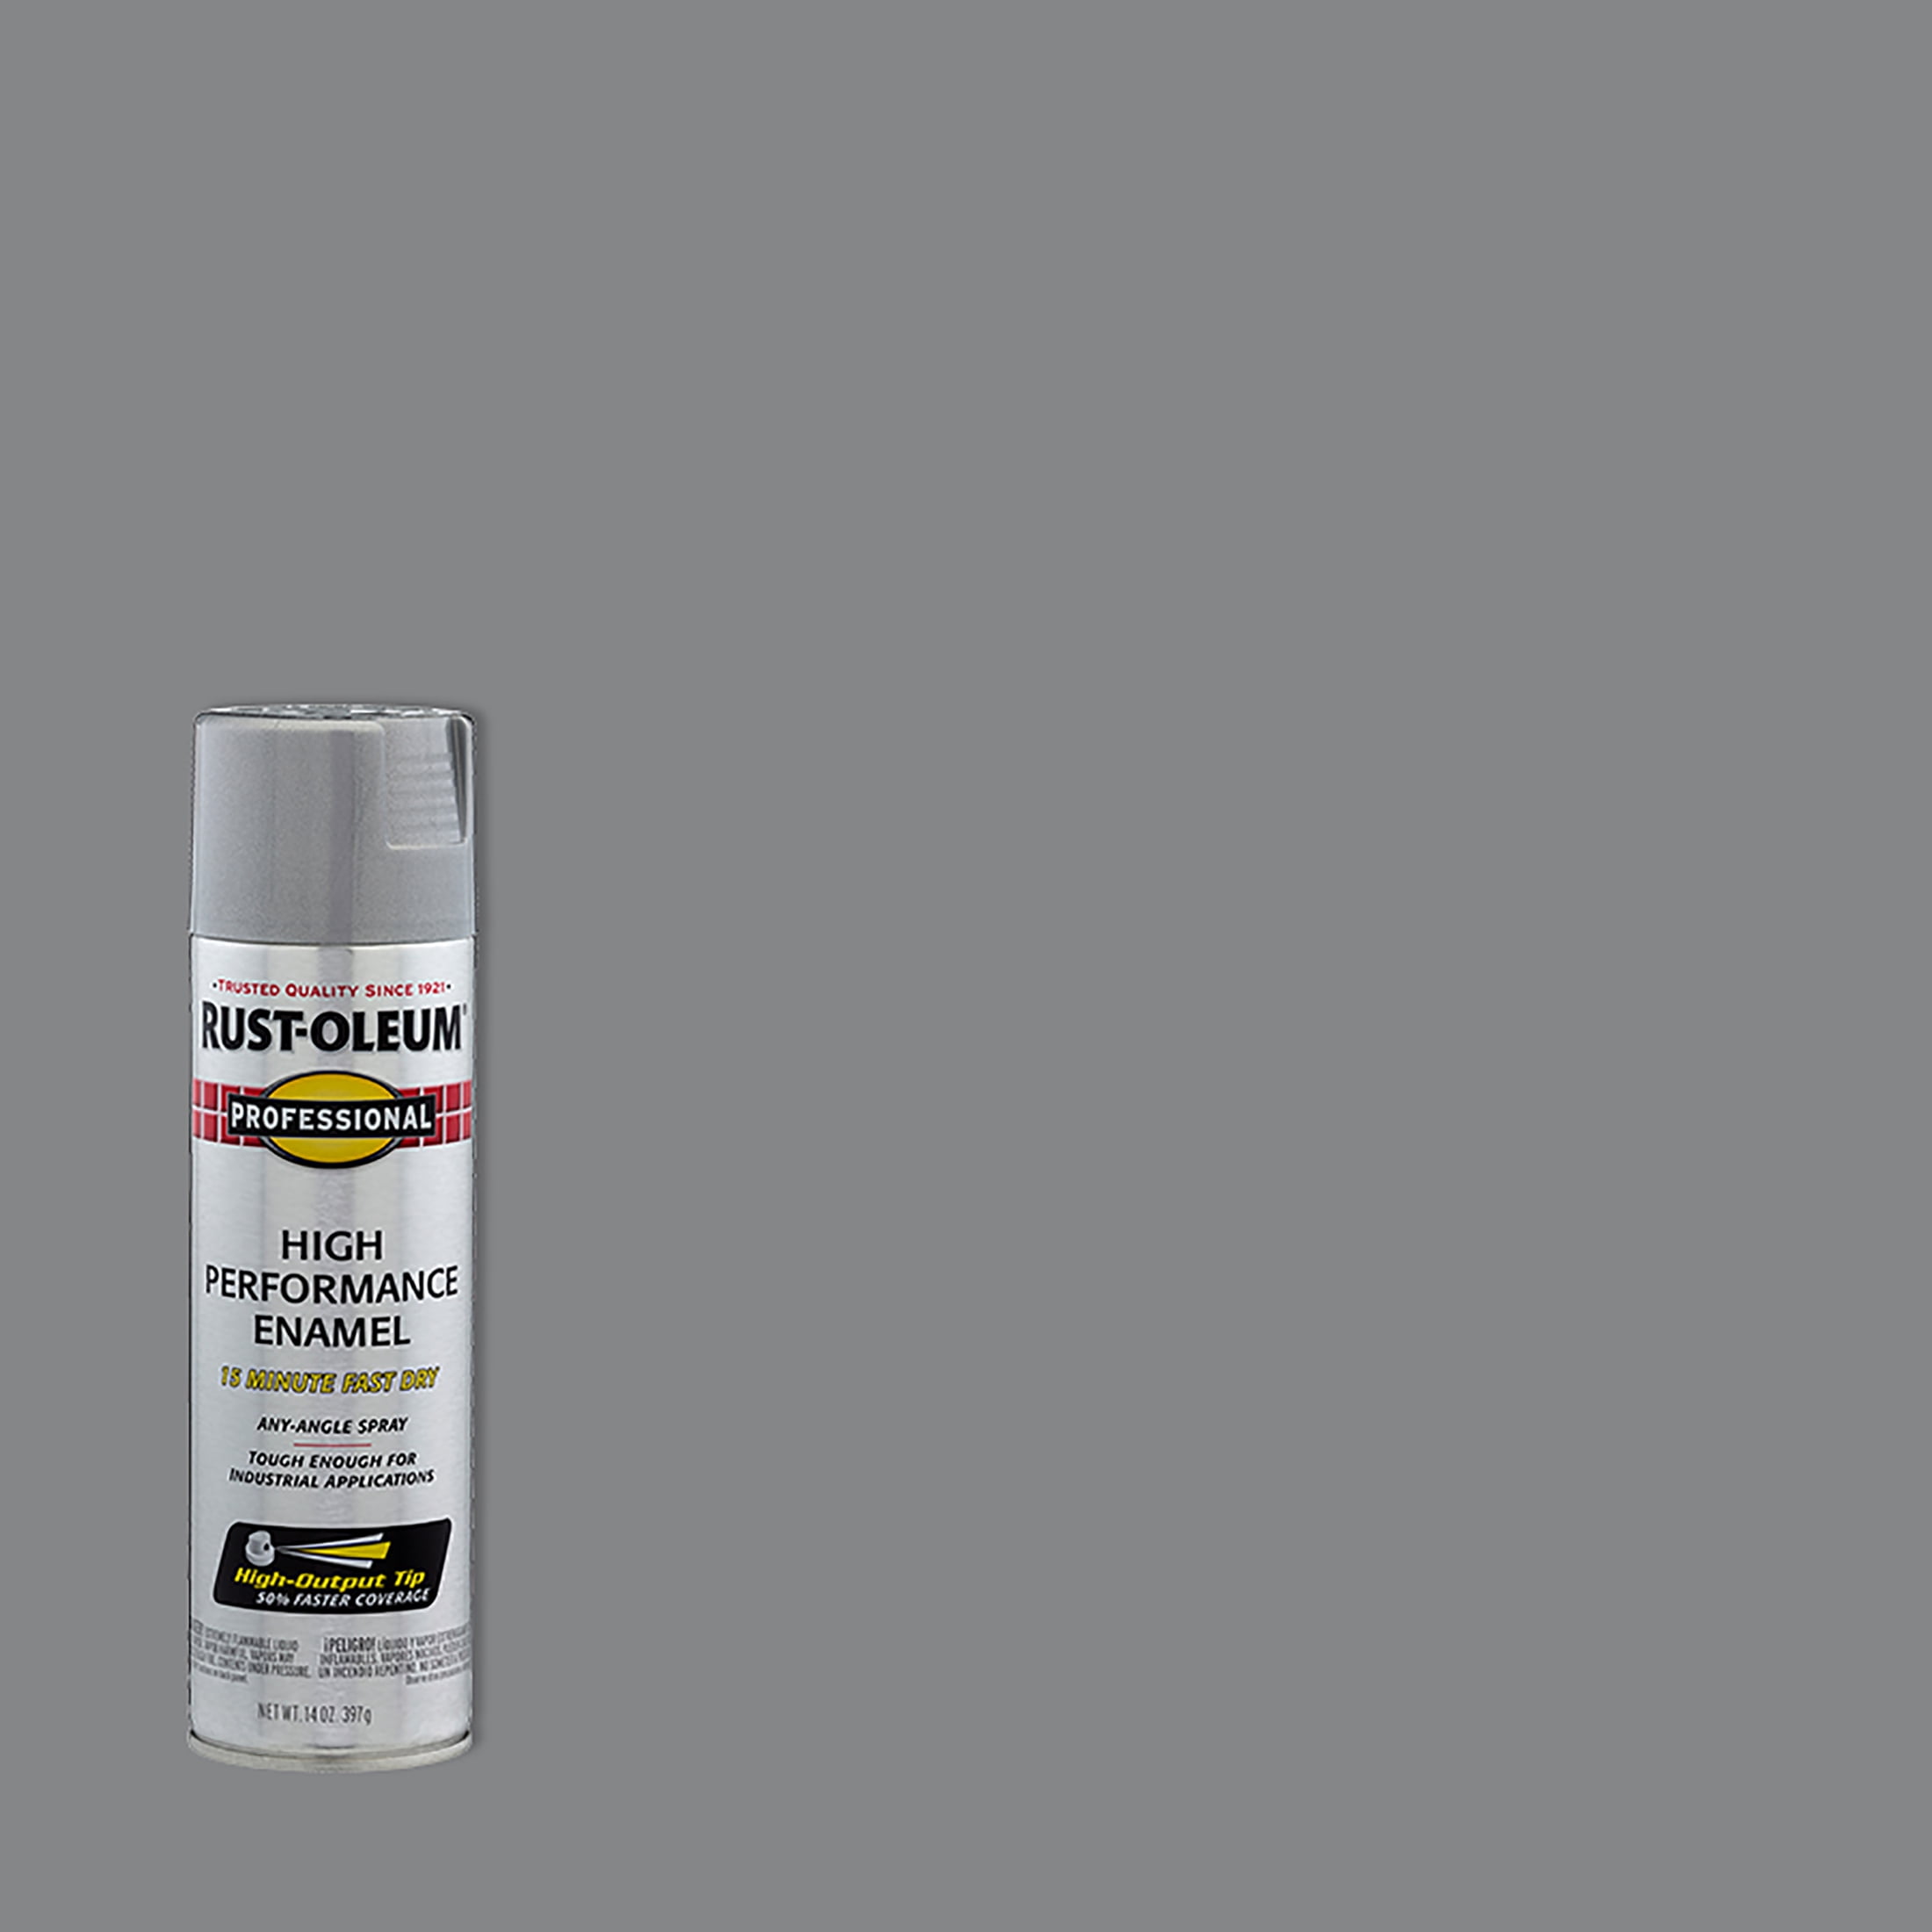 Frosted Glass, Rust-Oleum Specialty Spray Paint-1903830, 11 oz